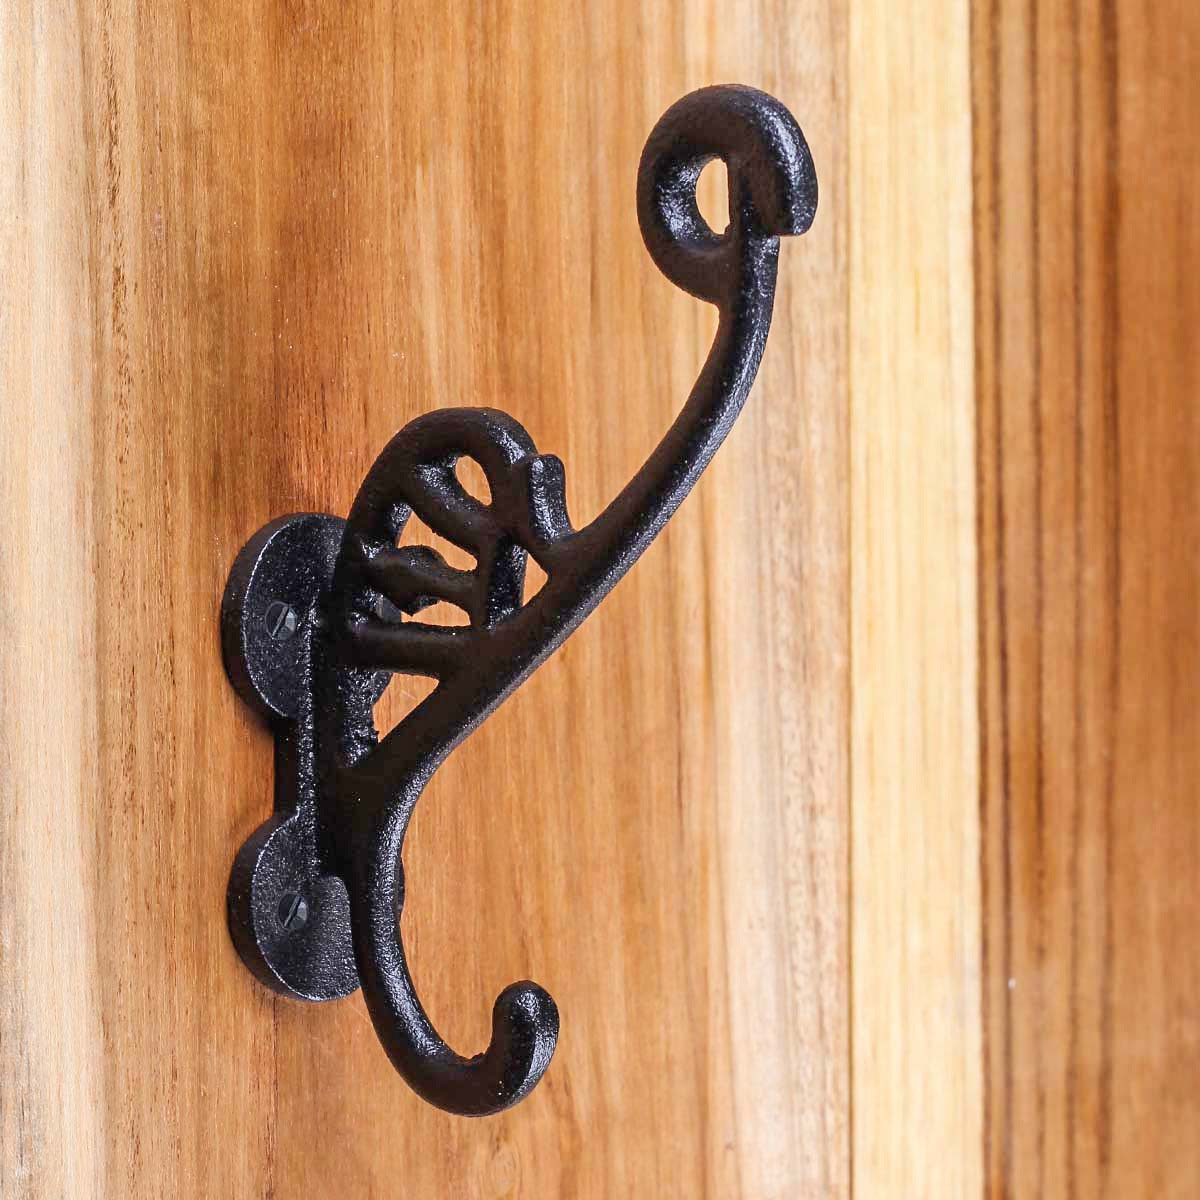 https://wroughtworks.com/images/wrought-iron/double-hook-black-wrought-iron-double-hook-5-12-in.jpg